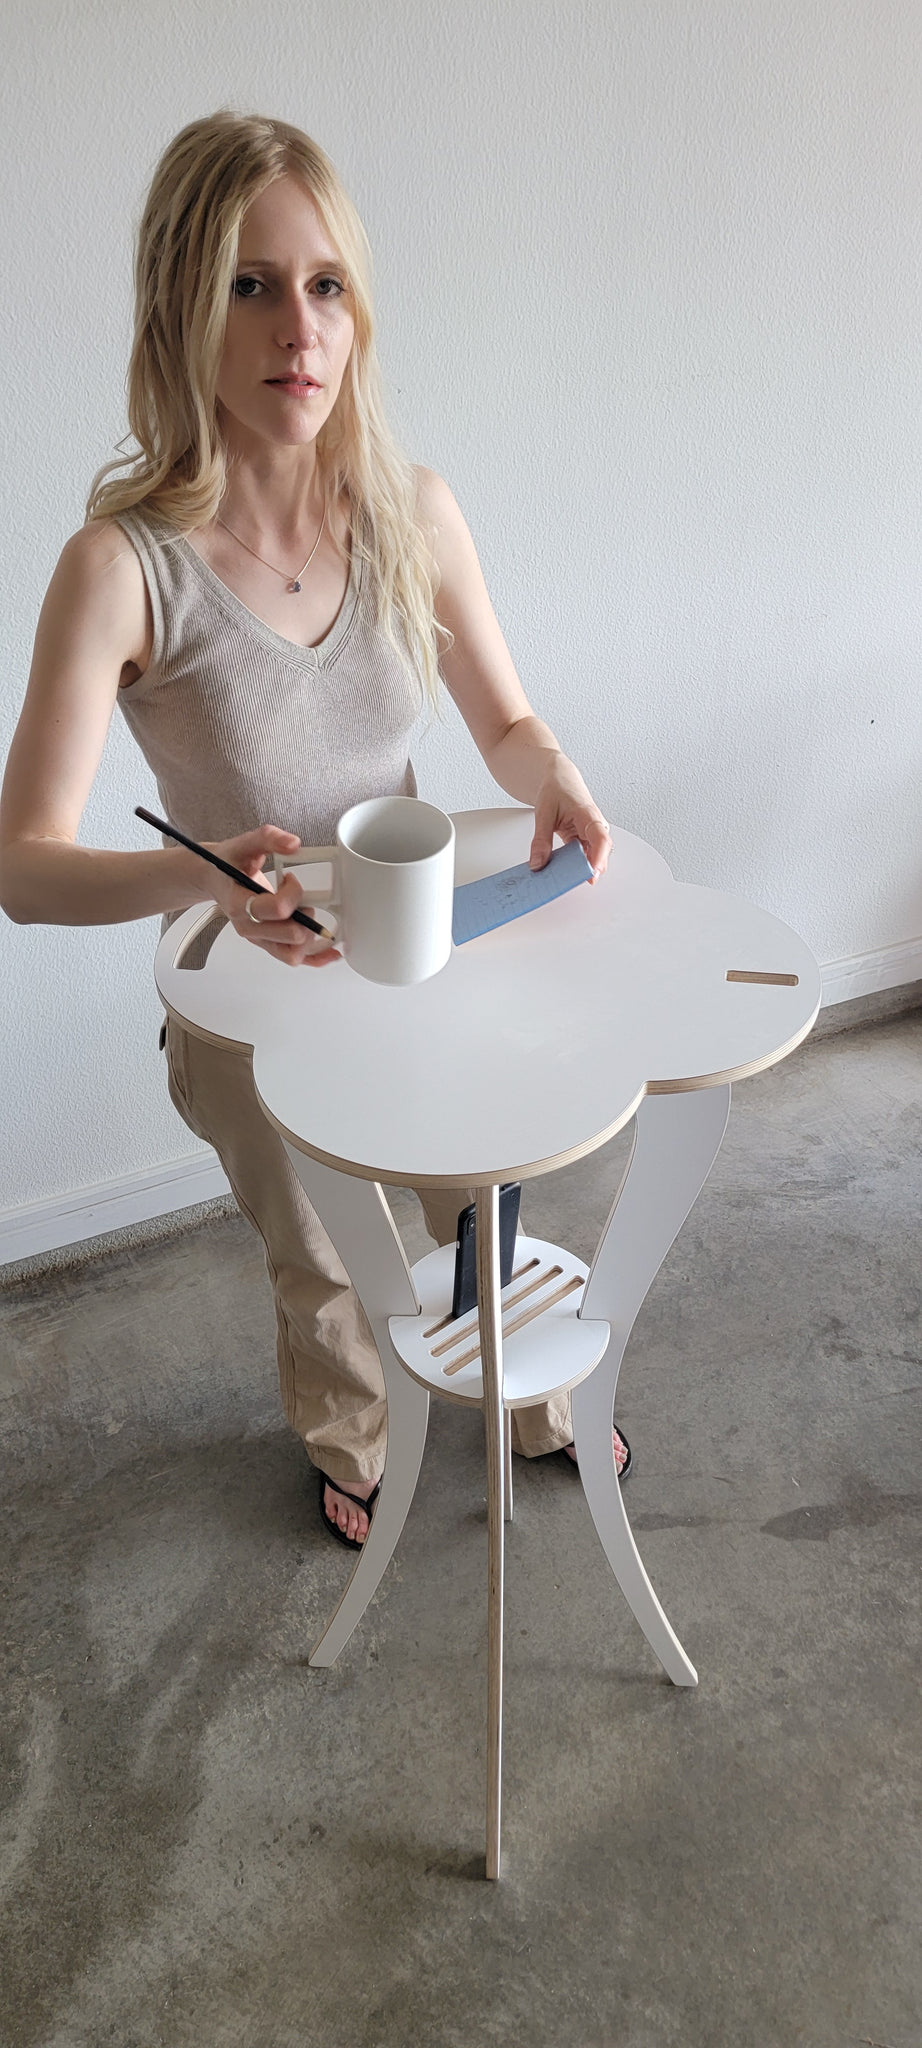 Lilly Updesk w/Cloud